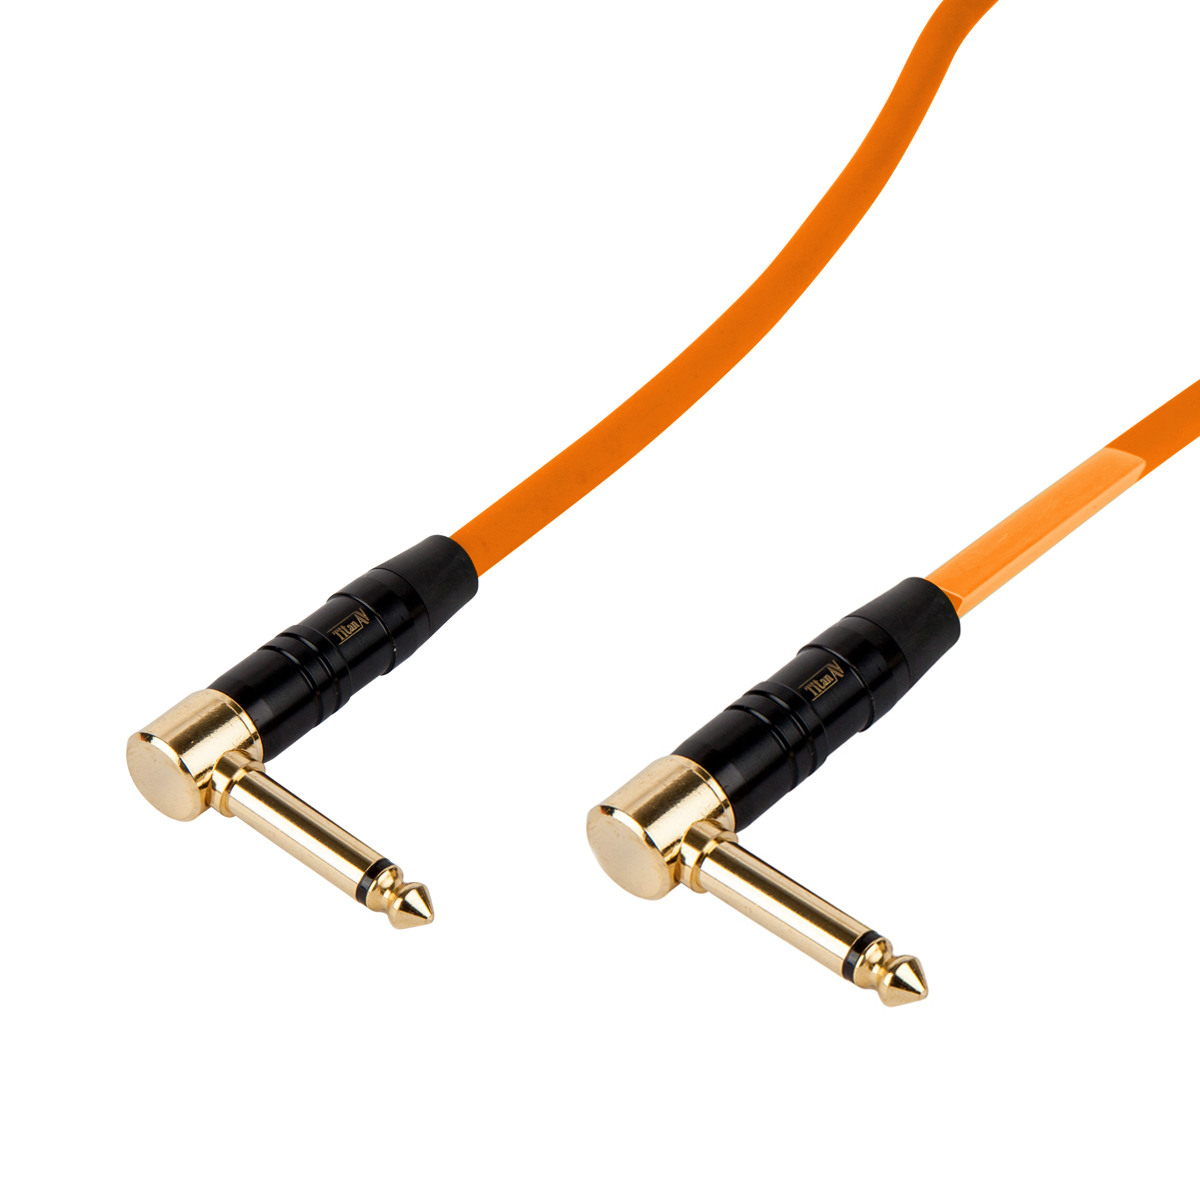 0.5m Guitar Patch Lead 1/4" Right Angle Jack to 1/4" Right Angle Jack, 6.5mm Orange PVC Jacket